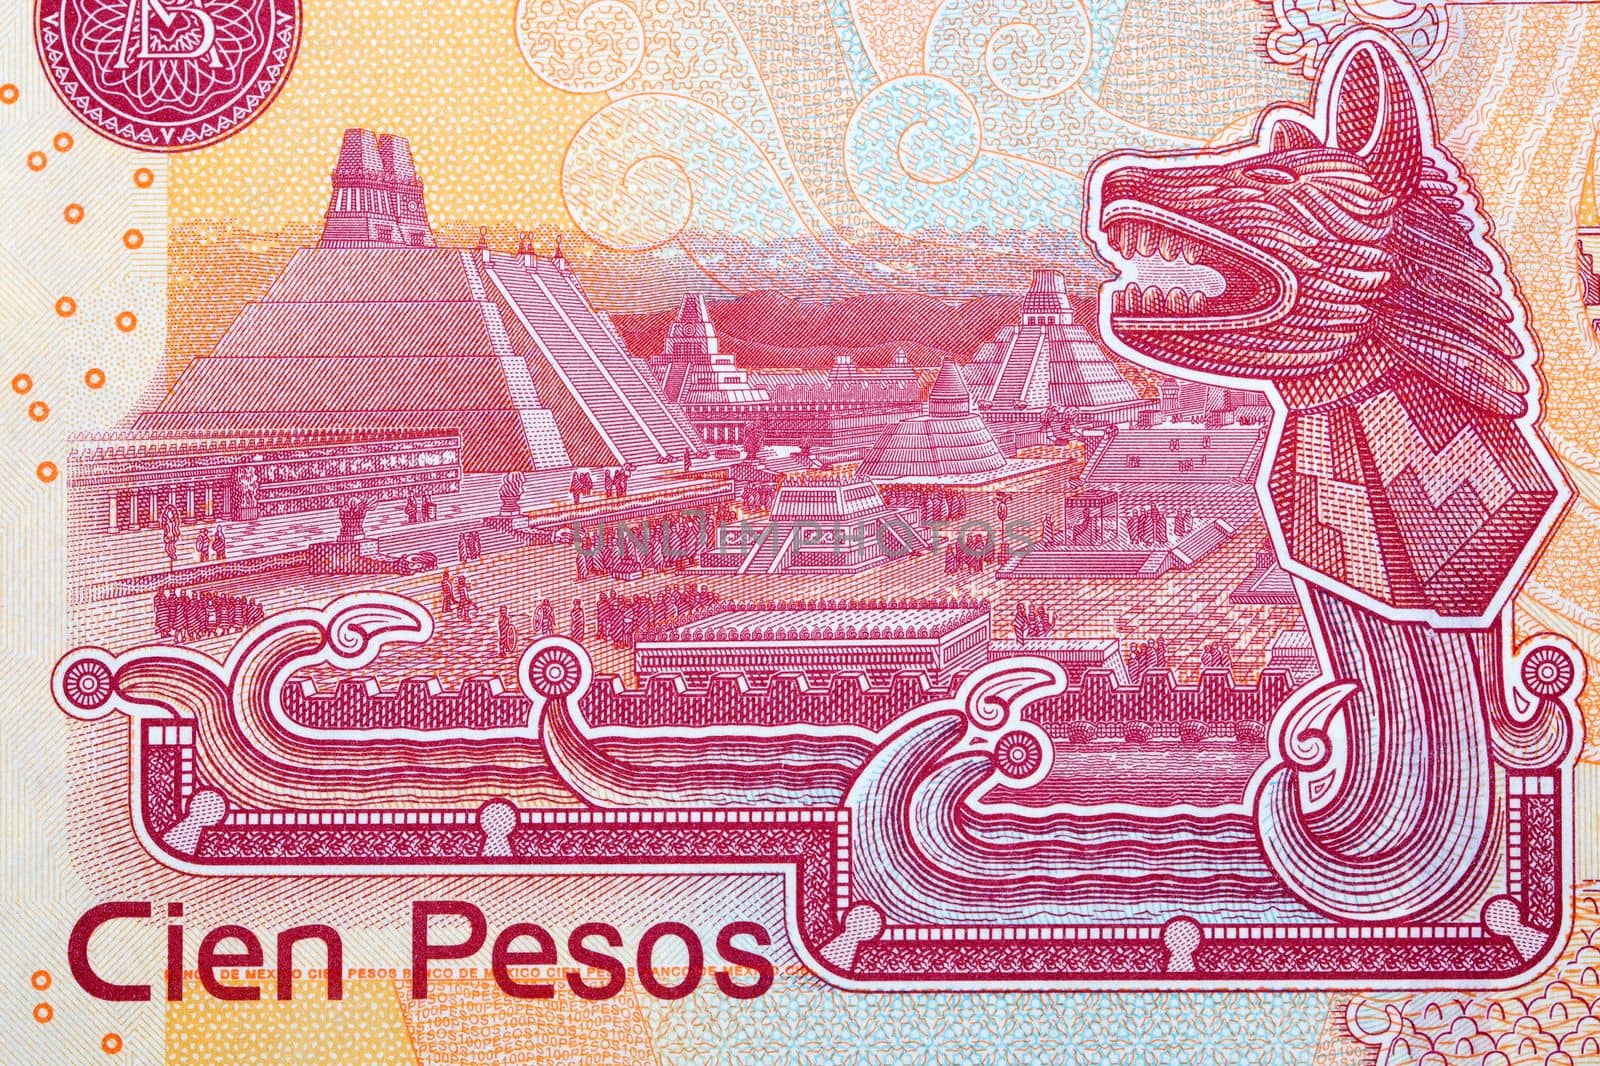 Temple and central square from Mexican money